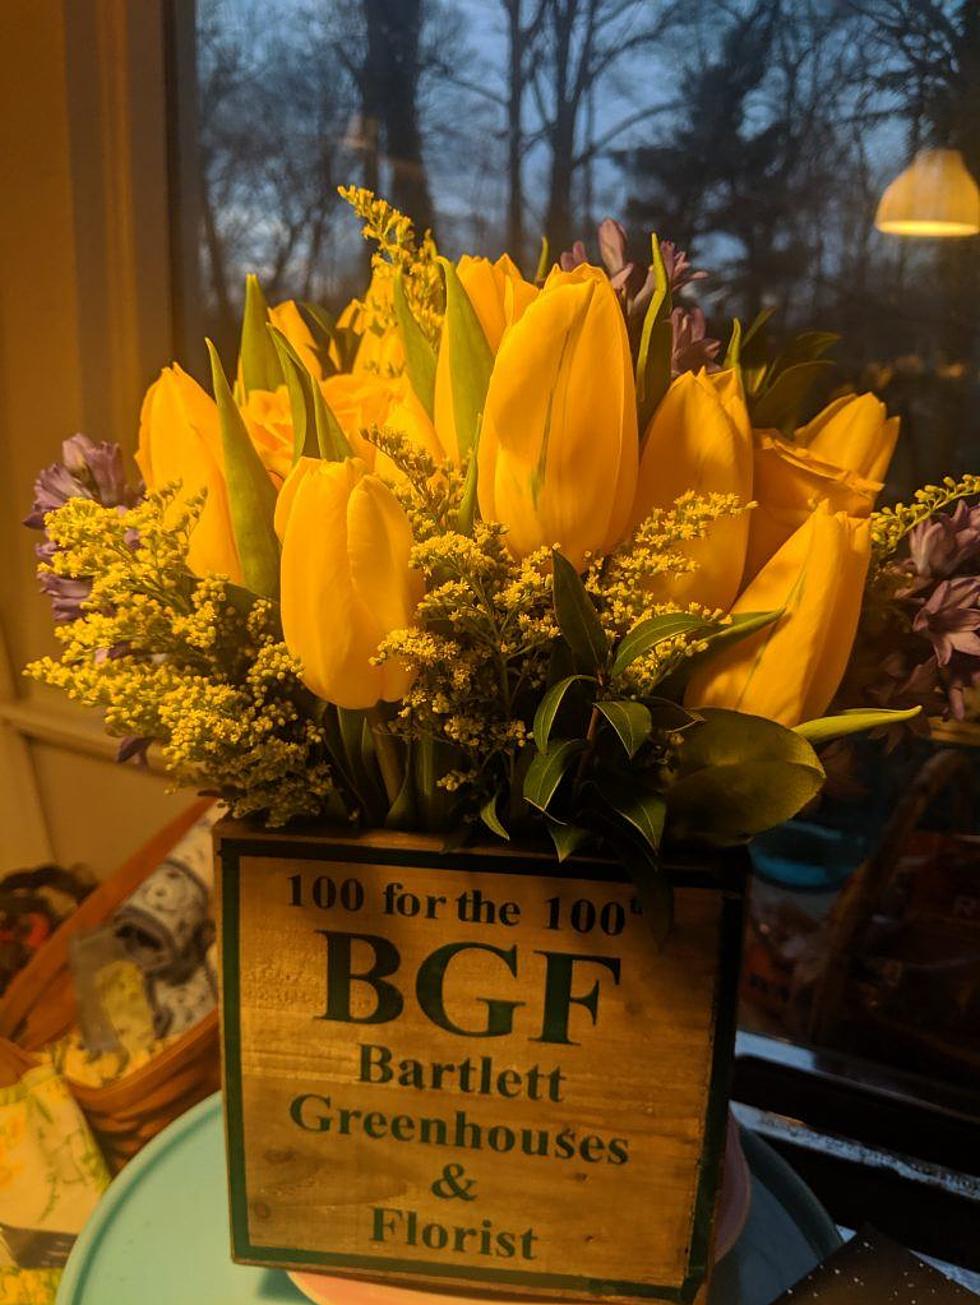 Sweet smelling thank you goes to 100 for florist&#8217;s centennial